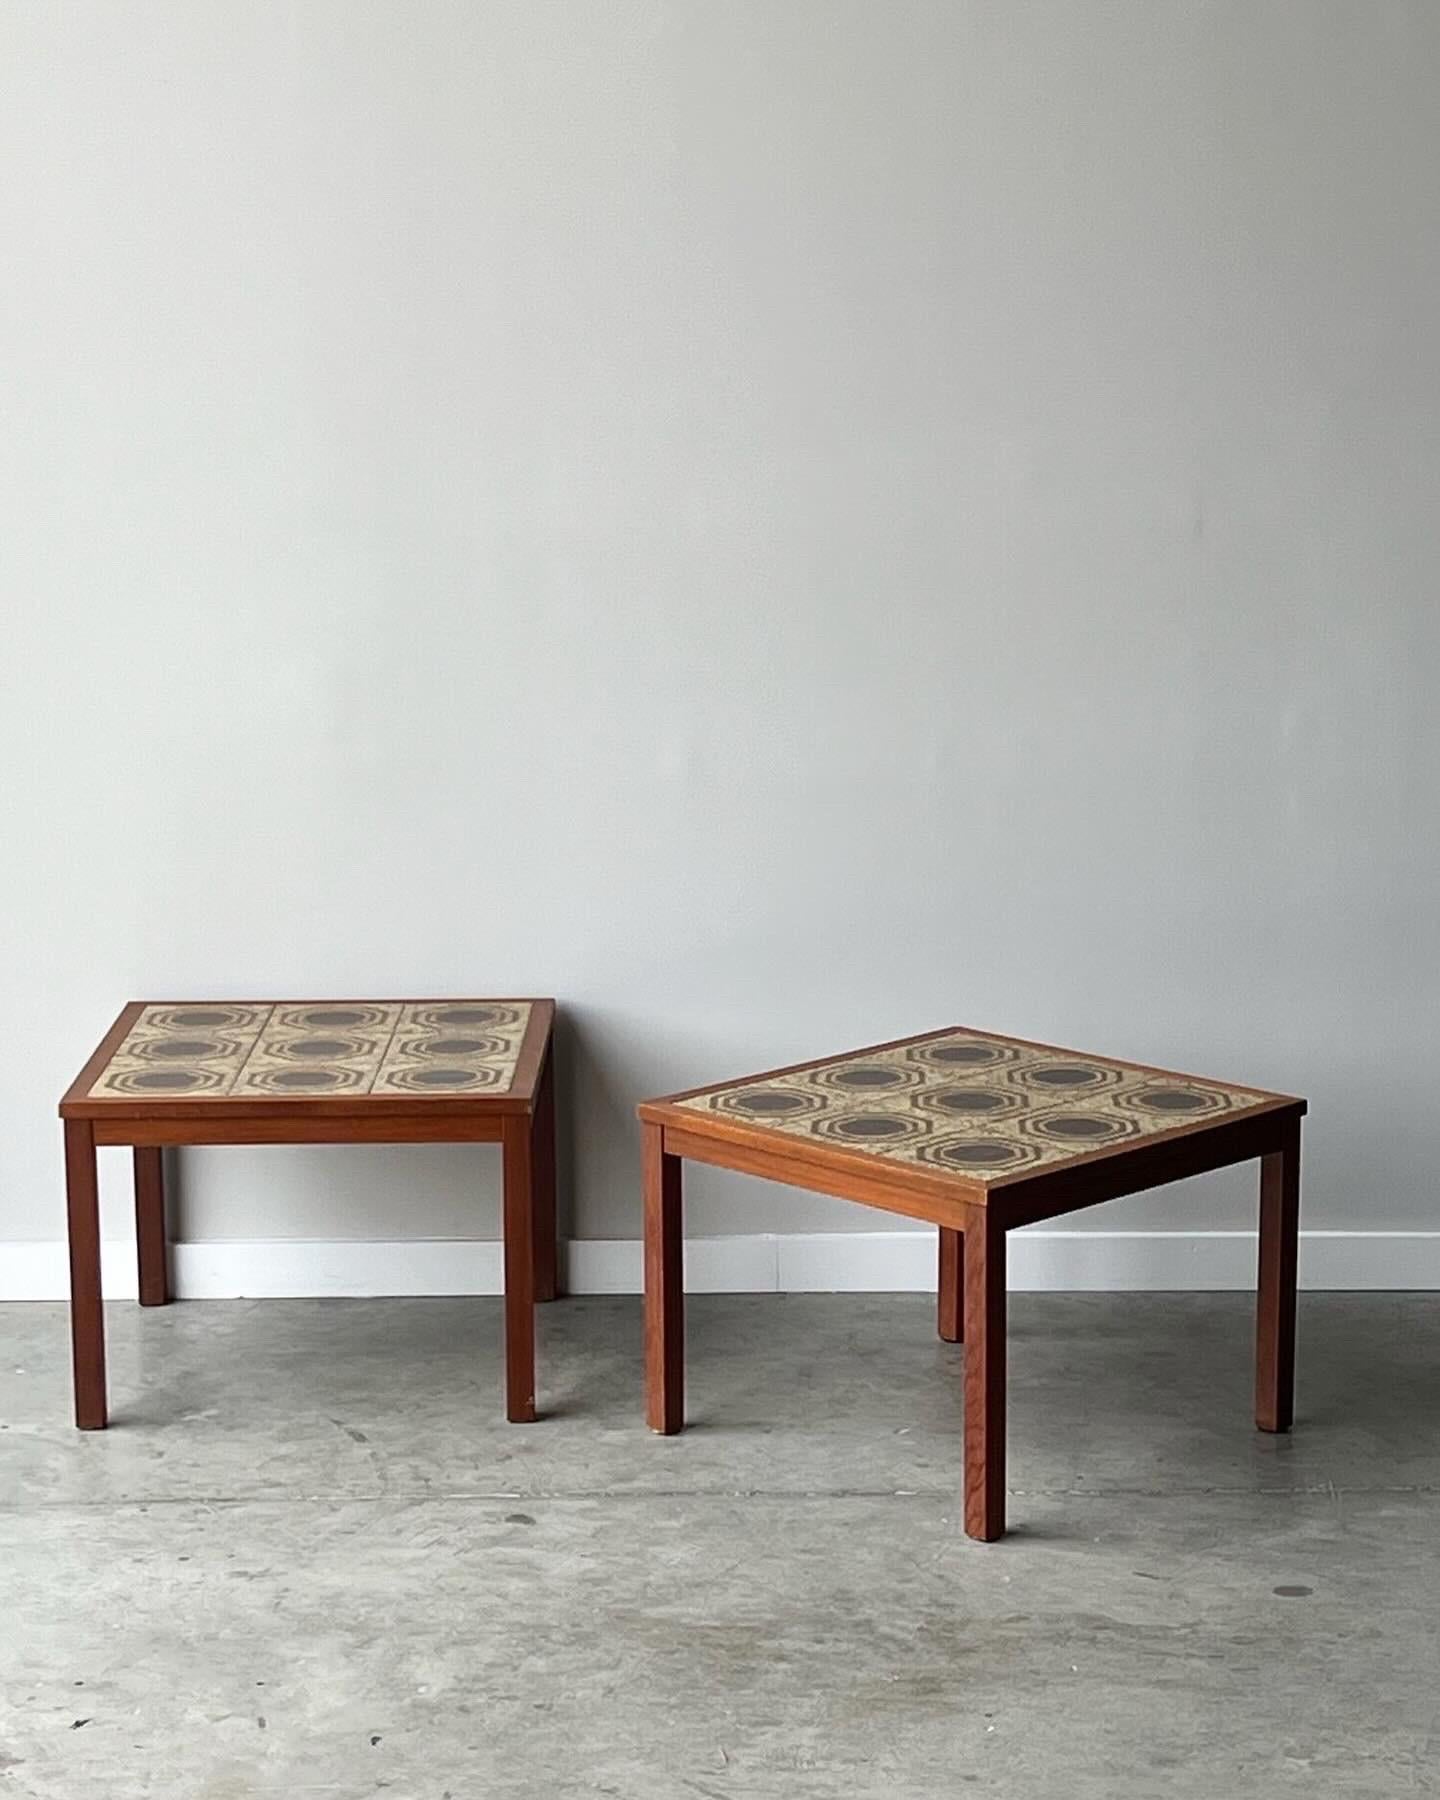 These gorgeous vintage end tables are so cool and perfect for plants or any items table side. Hearty teak wood frames with very cool glazed and well designed tiles. In good vintage condition with minor wear consistent with age and use. One small